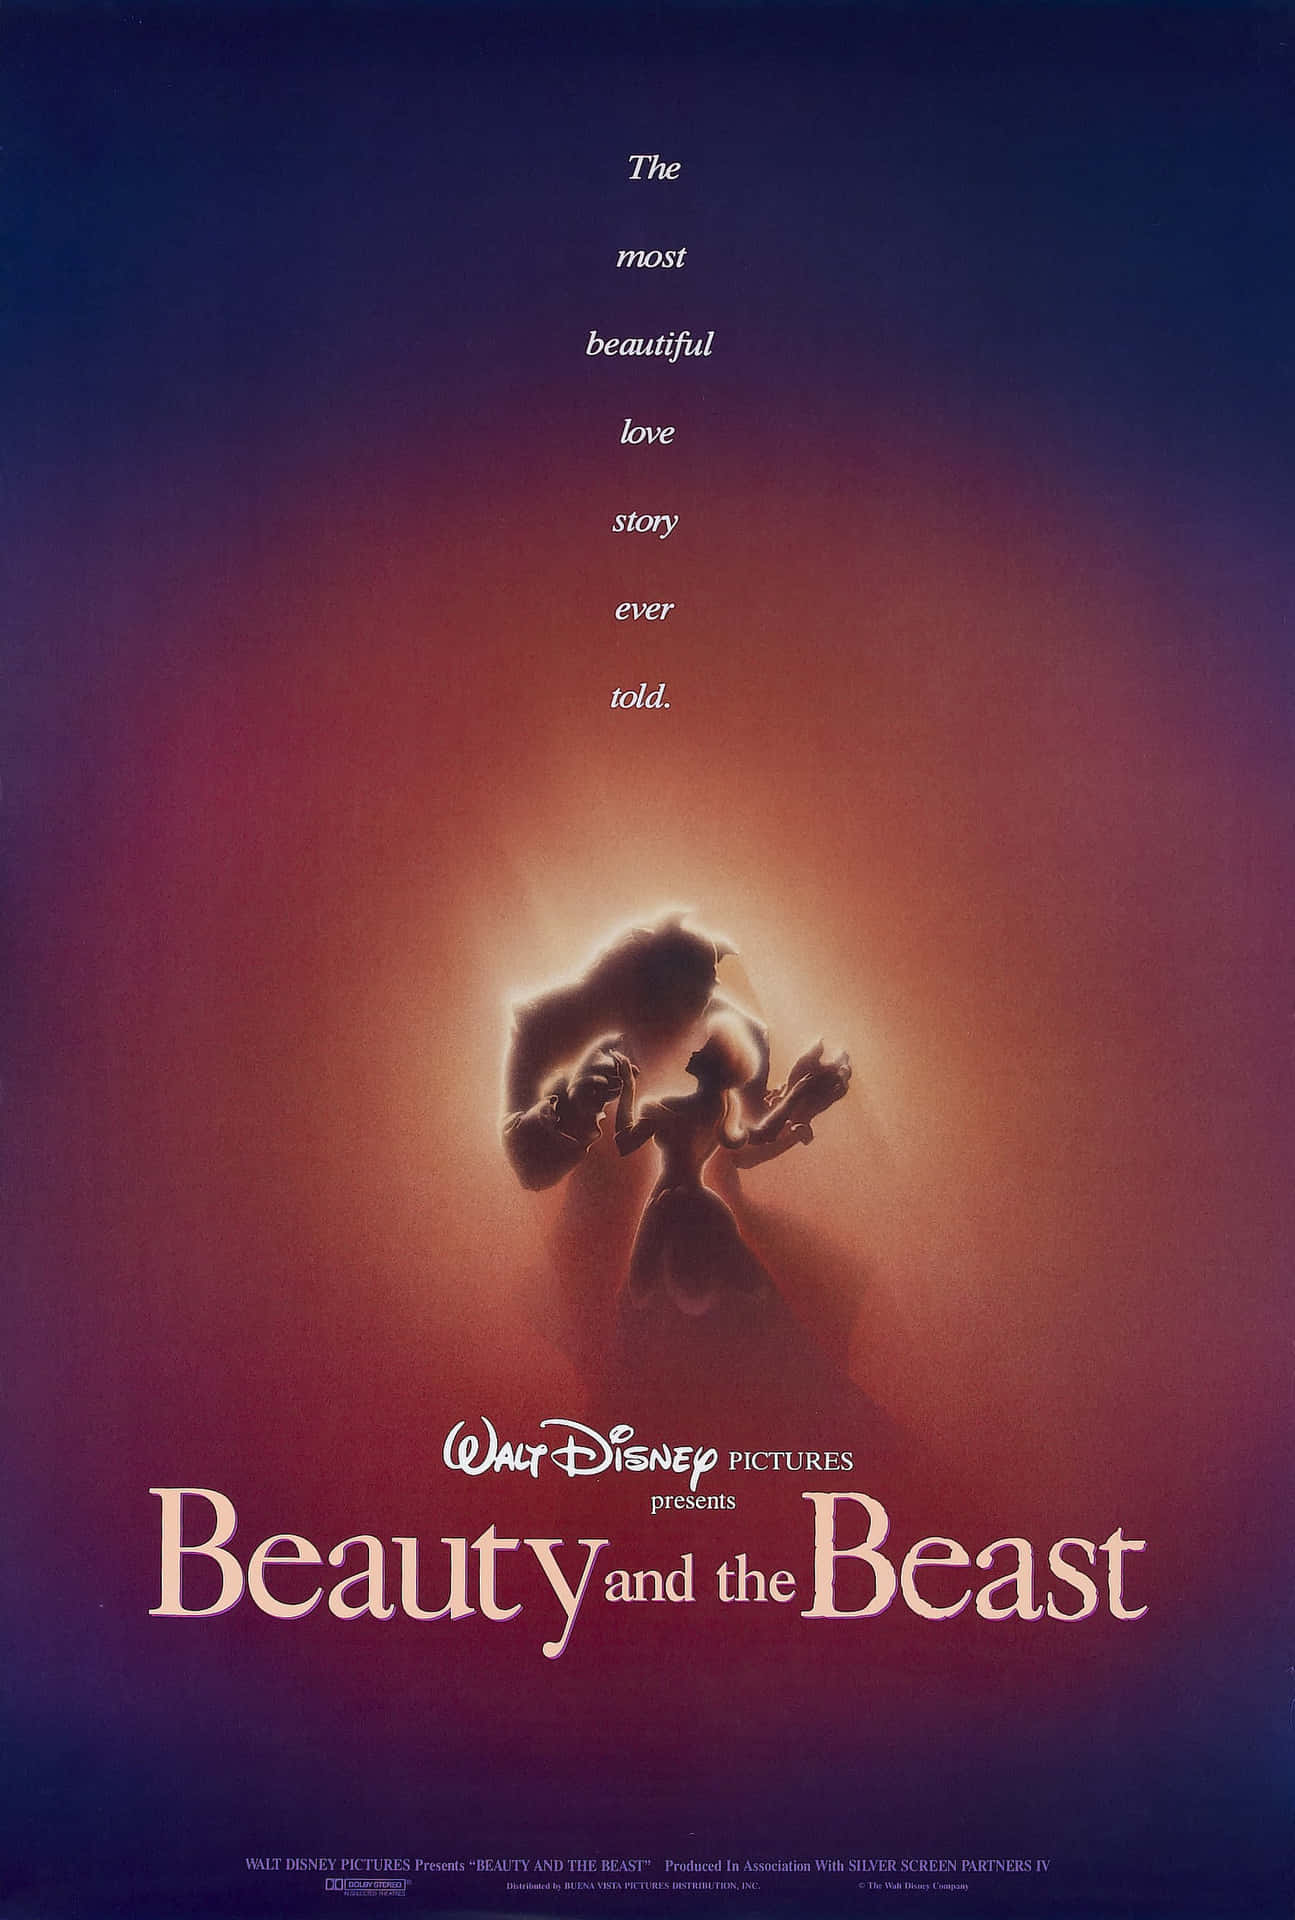 True love prevails in Disney's iconic animated classic, Beauty and the Beast